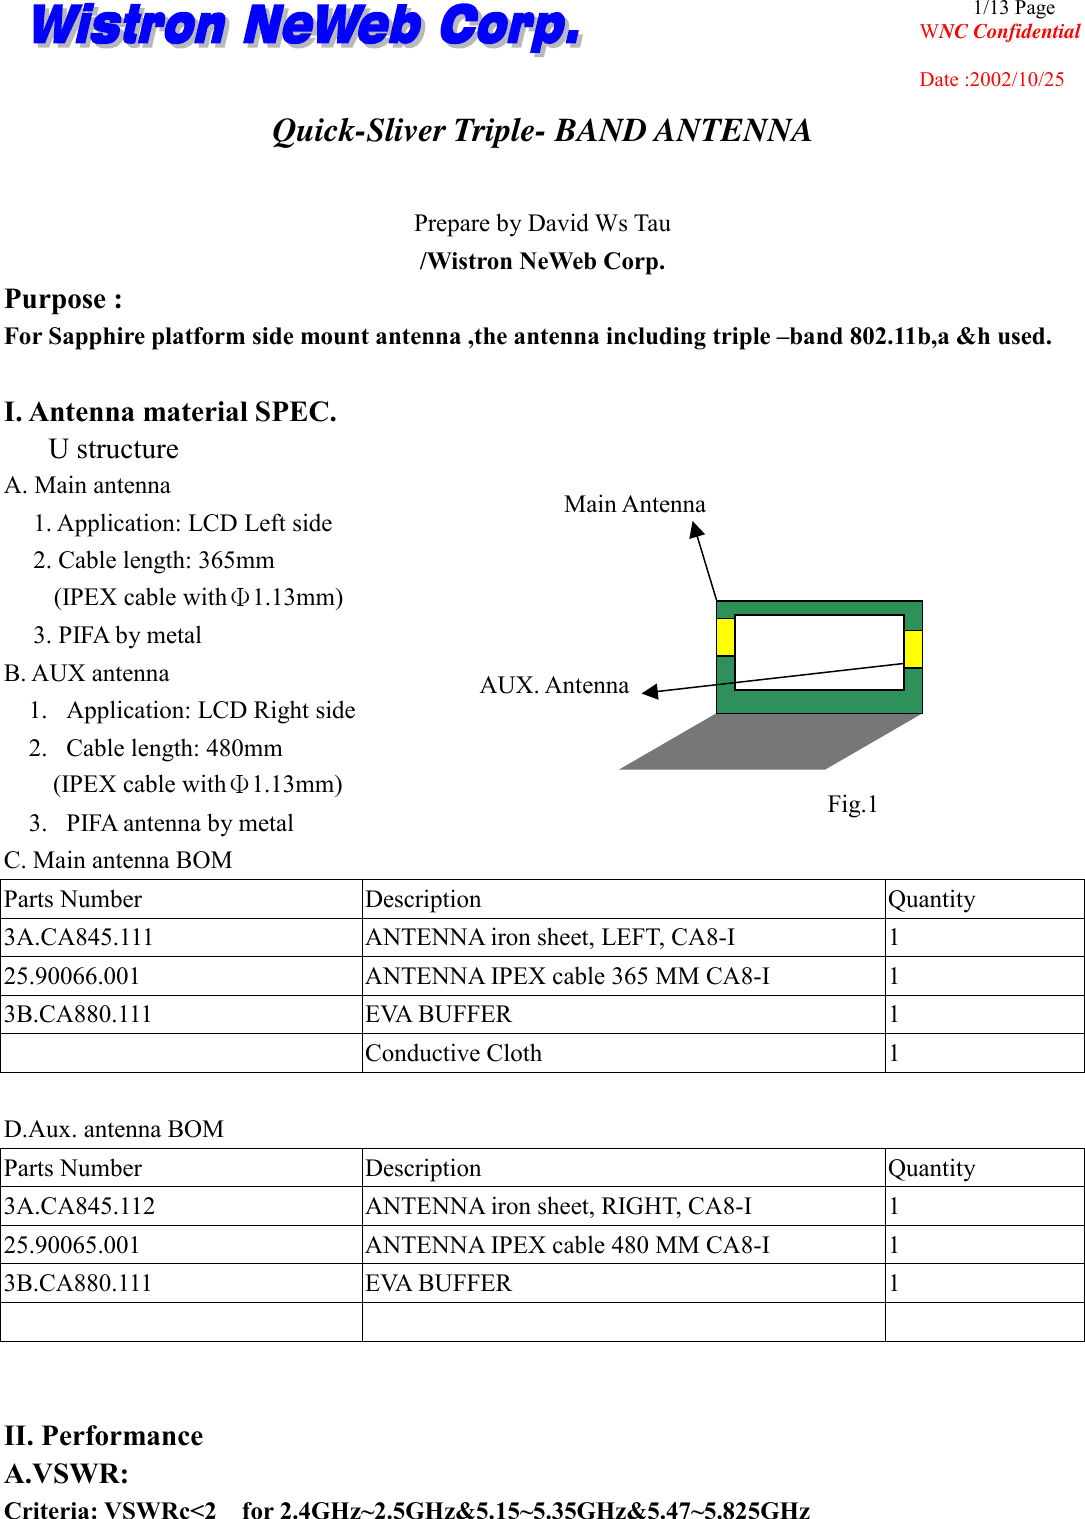                                                                                              1/13 Page WNC Confidential       Date :2002/10/25 Quick-Sliver Triple- BAND ANTENNA    Prepare by David Ws Tau   /Wistron NeWeb Corp. Purpose : For Sapphire platform side mount antenna ,the antenna including triple –band 802.11b,a &amp;h used.    I. Antenna material SPEC. U structure A. Main antenna 1. Application: LCD Left side   2. Cable length: 365mm (IPEX cable withΦ1.13mm) 3. PIFA by metal   B. AUX antenna 1.  Application: LCD Right side   2.  Cable length: 480mm (IPEX cable withΦ1.13mm) 3.  PIFA antenna by metal   C. Main antenna BOM Parts Number  Description  Quantity 3A.CA845.111  ANTENNA iron sheet, LEFT, CA8-I  1 25.90066.001  ANTENNA IPEX cable 365 MM CA8-I  1 3B.CA880.111 EVA BUFFER  1  Conductive Cloth 1  D.Aux. antenna BOM Parts Number  Description  Quantity 3A.CA845.112  ANTENNA iron sheet, RIGHT, CA8-I  1 25.90065.001  ANTENNA IPEX cable 480 MM CA8-I  1 3B.CA880.111 EVA BUFFER  1       II. Performance   A.VSWR: Criteria: VSWRc&lt;2  for 2.4GHz~2.5GHz&amp;5.15~5.35GHz&amp;5.47~5.825GHz Main Antenna AUX. AntennaFig.1 